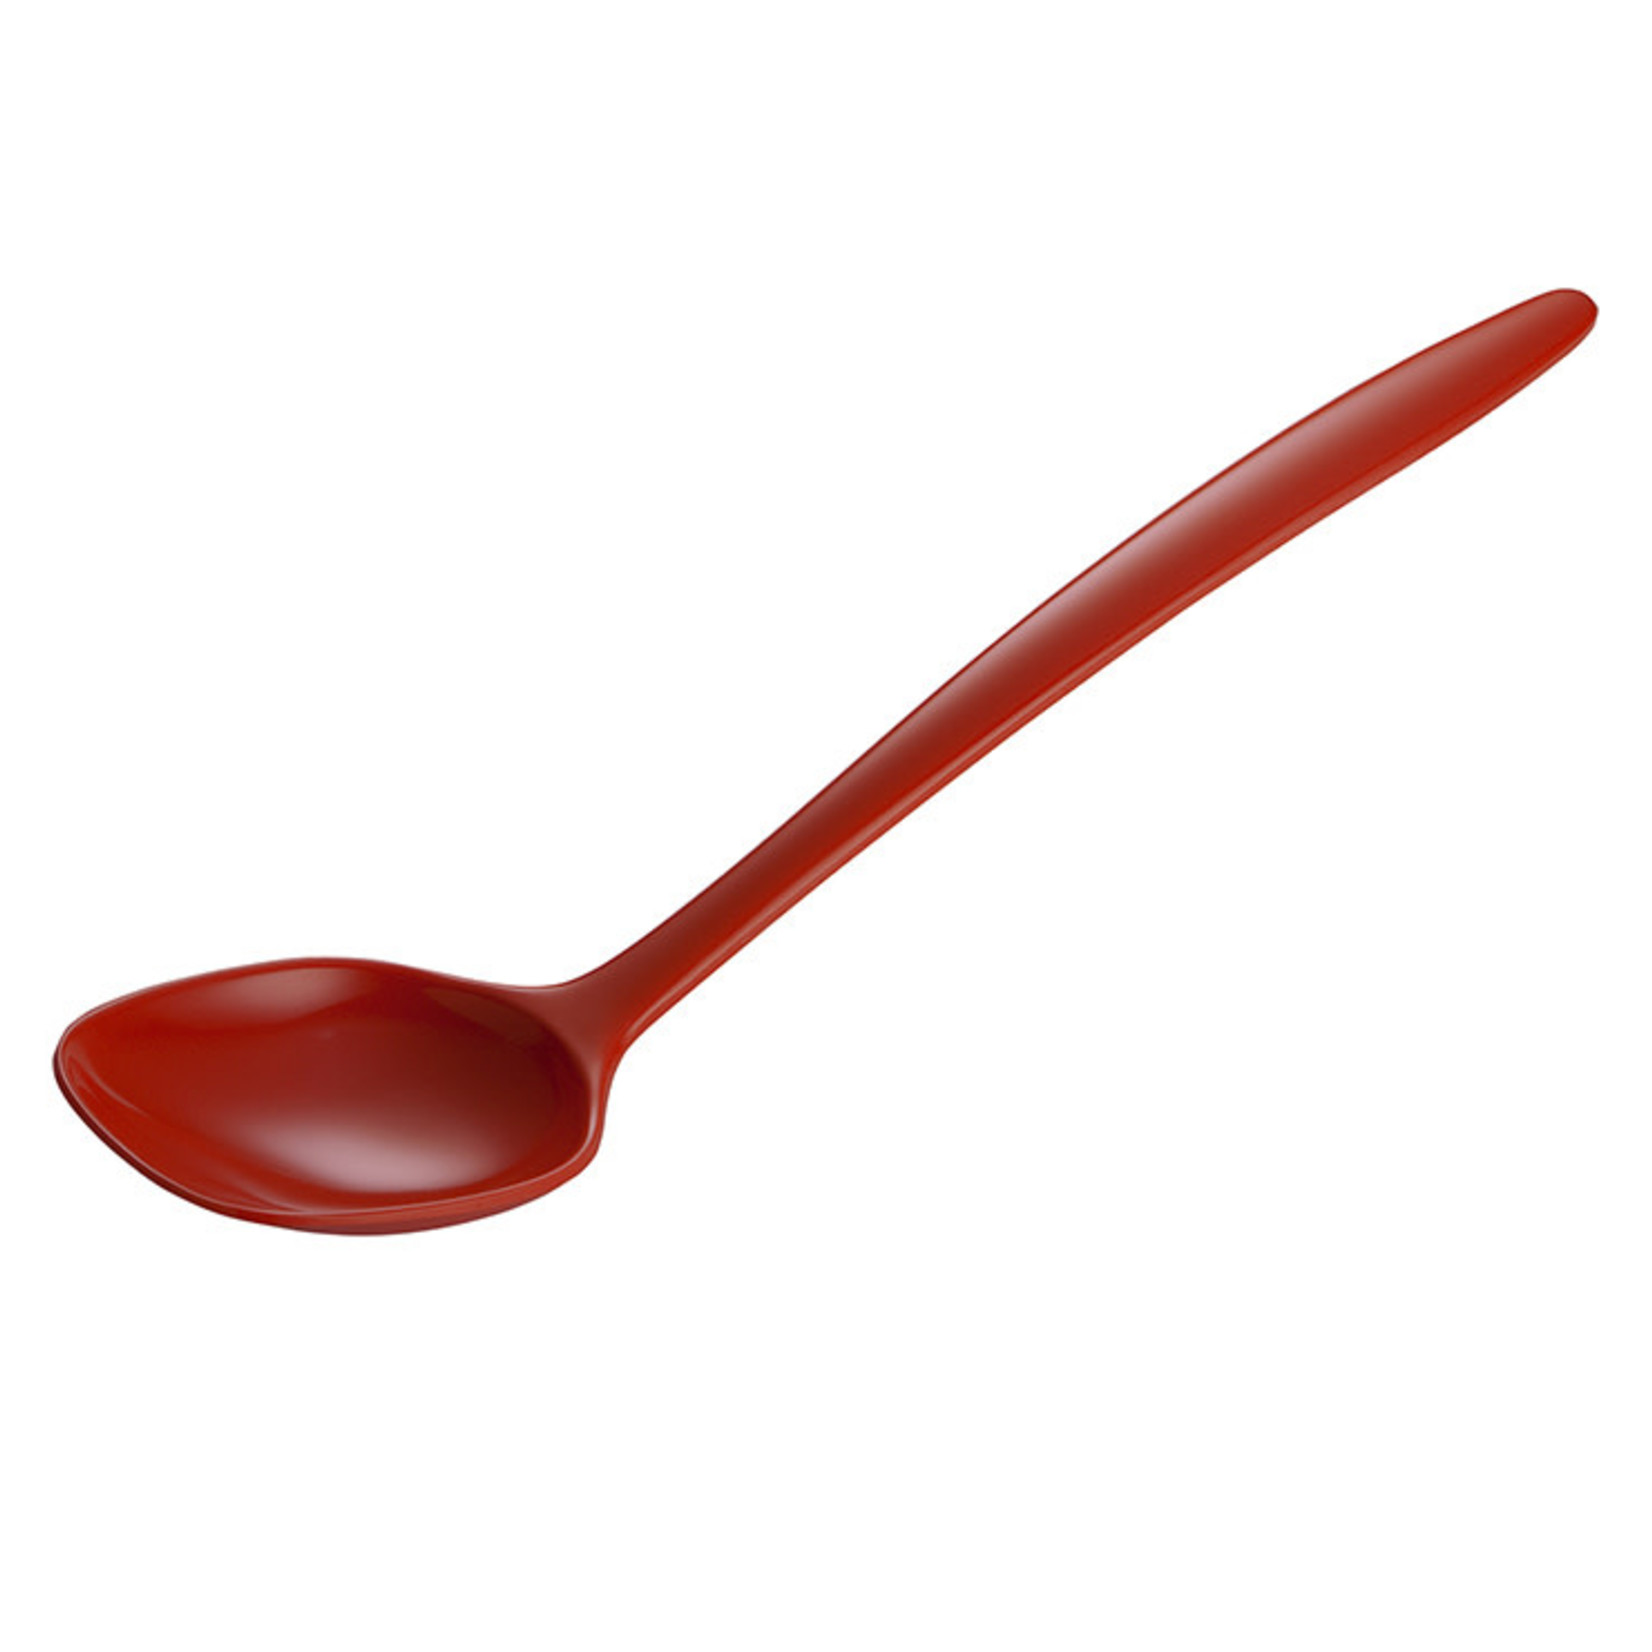 12" ASSORTED COLOR MIXING SPOON